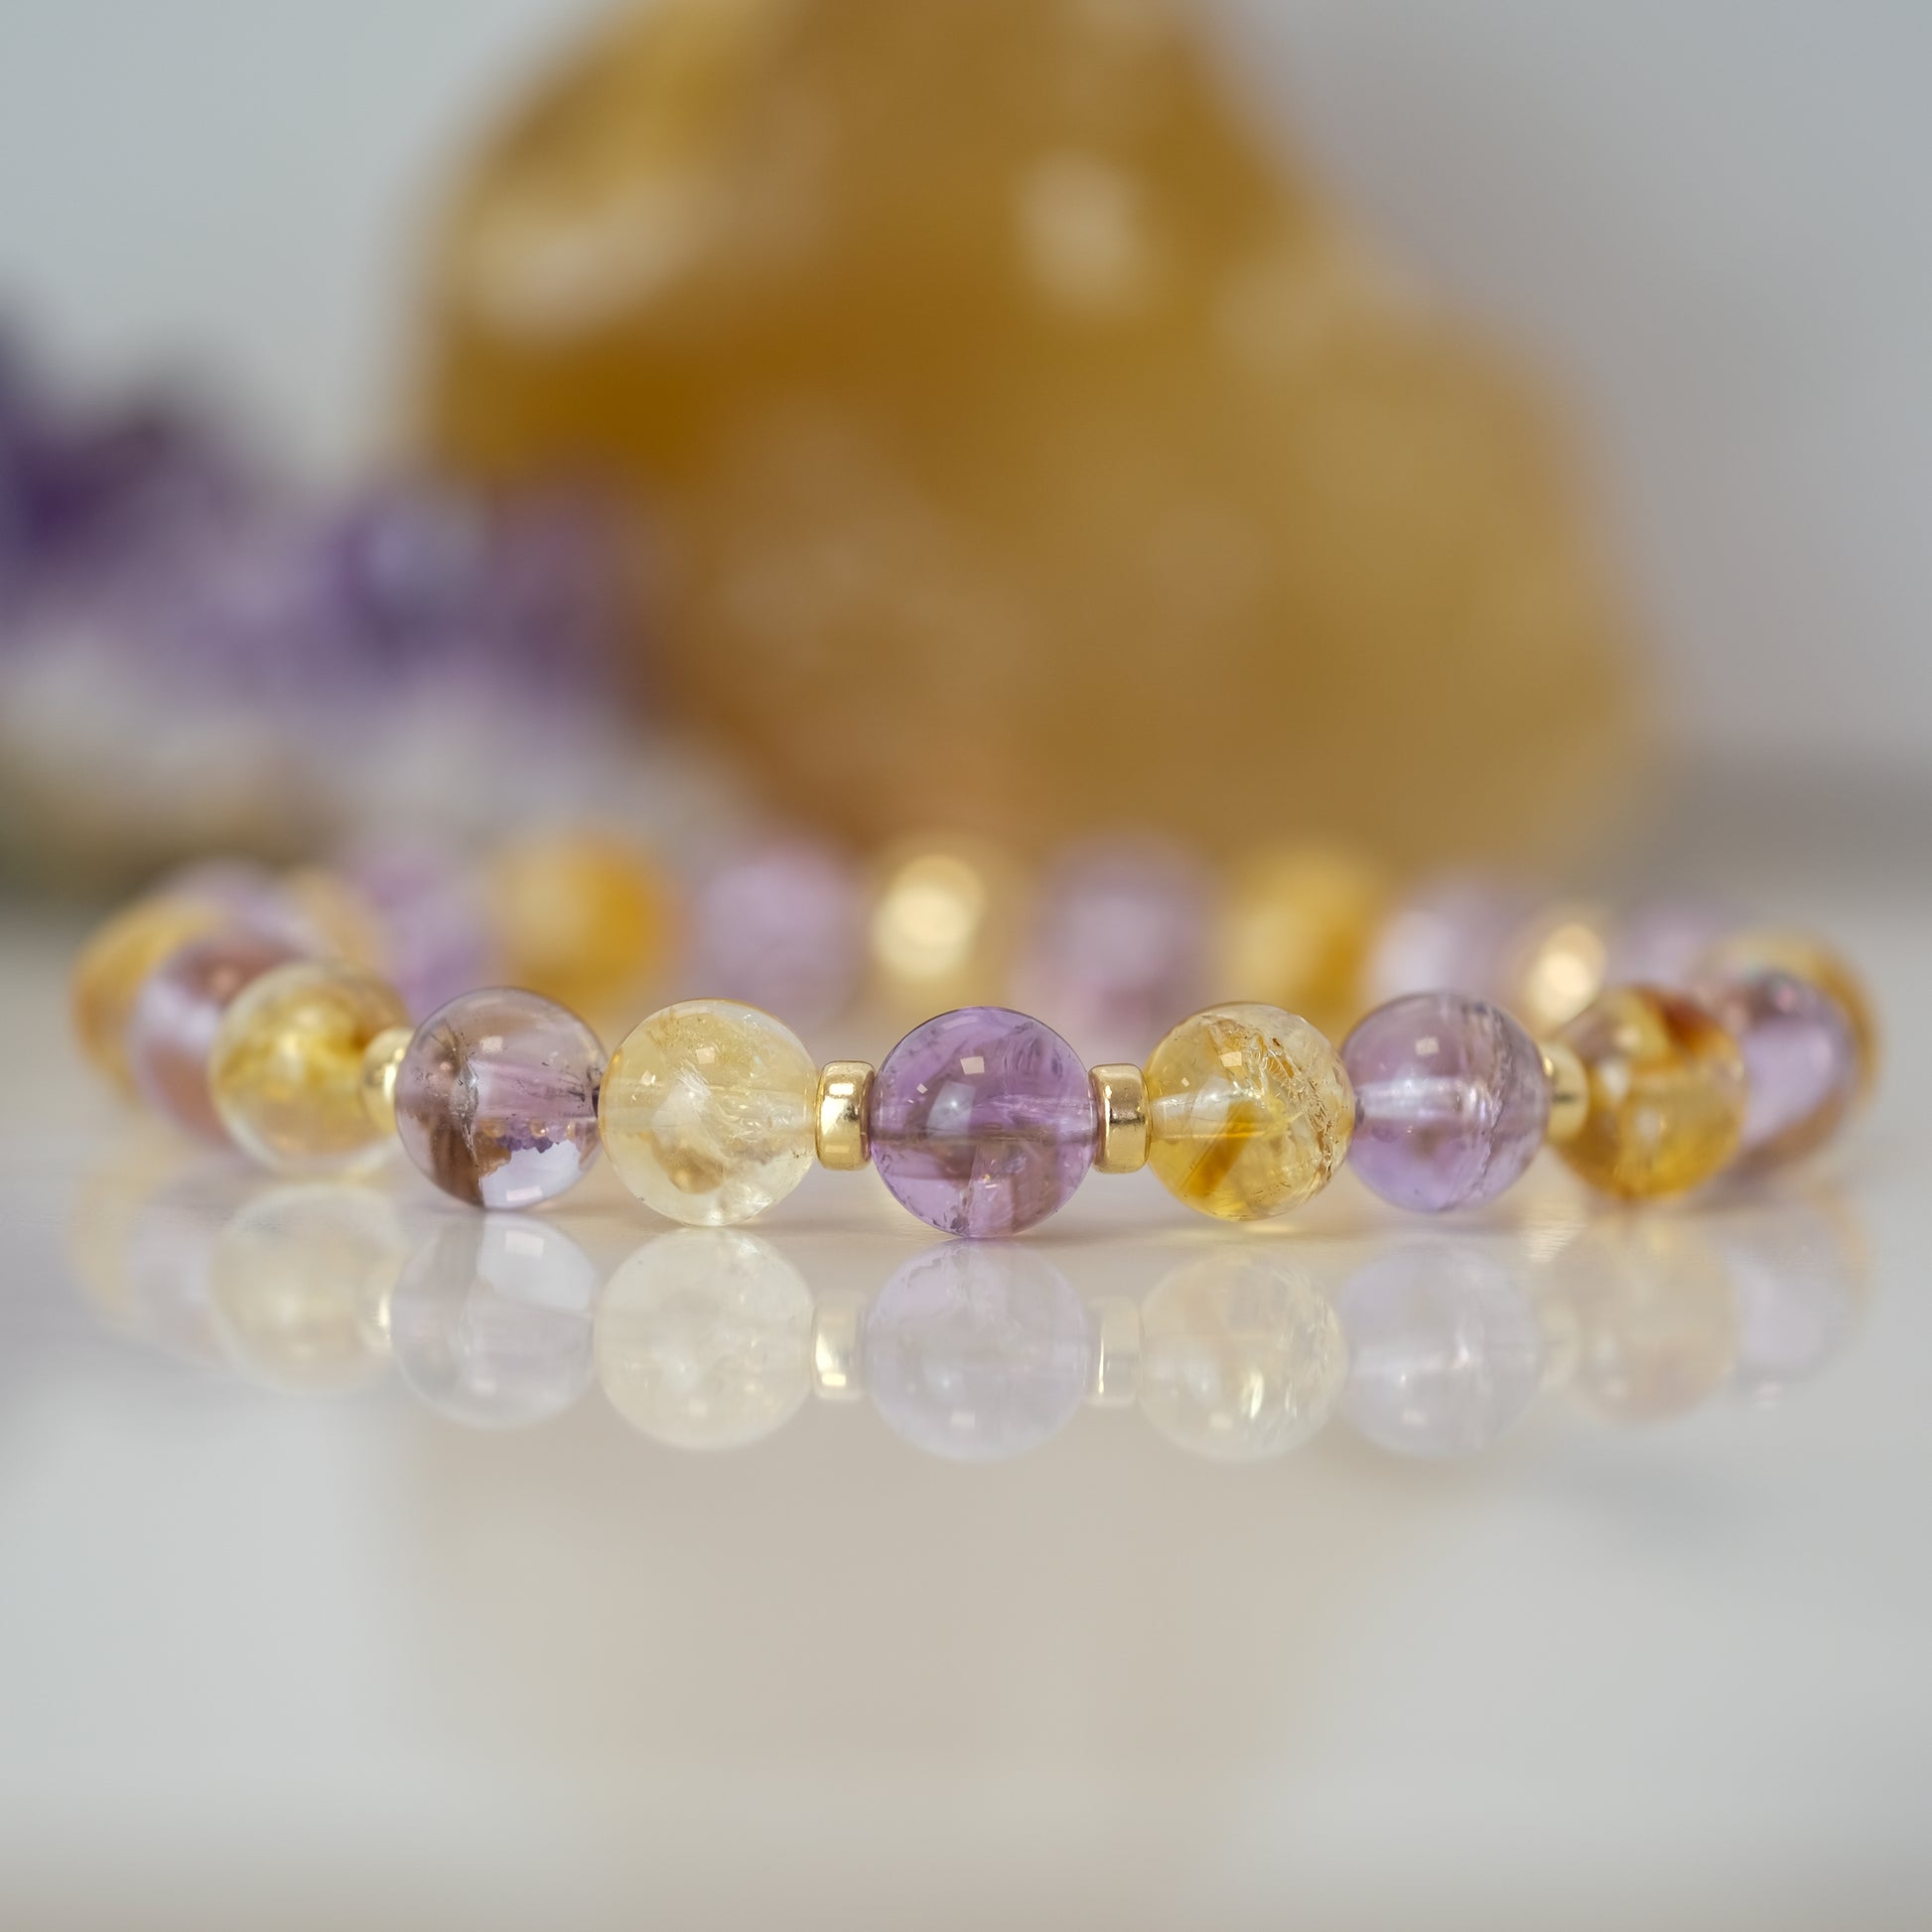 Close up photo of Amethyst and Citrine gemstone bracelet with 14kt gold filled accessories